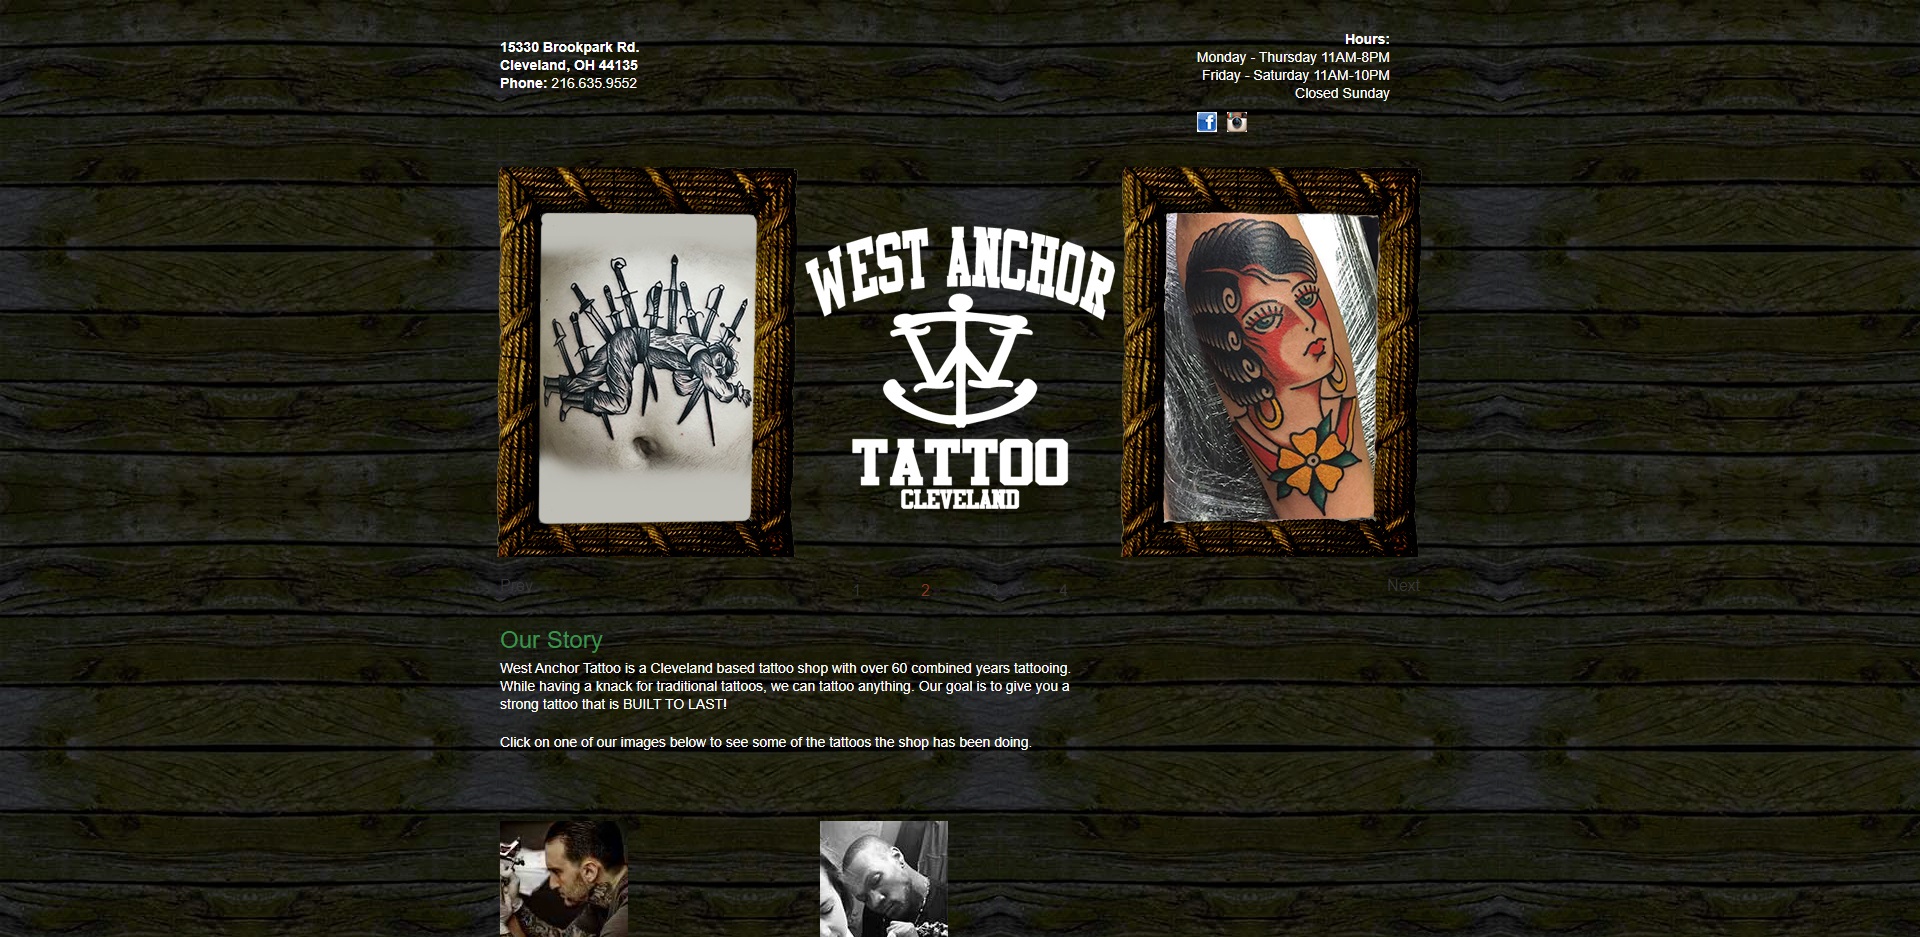 5 Best Tattoo Shops in Cleveland, OH